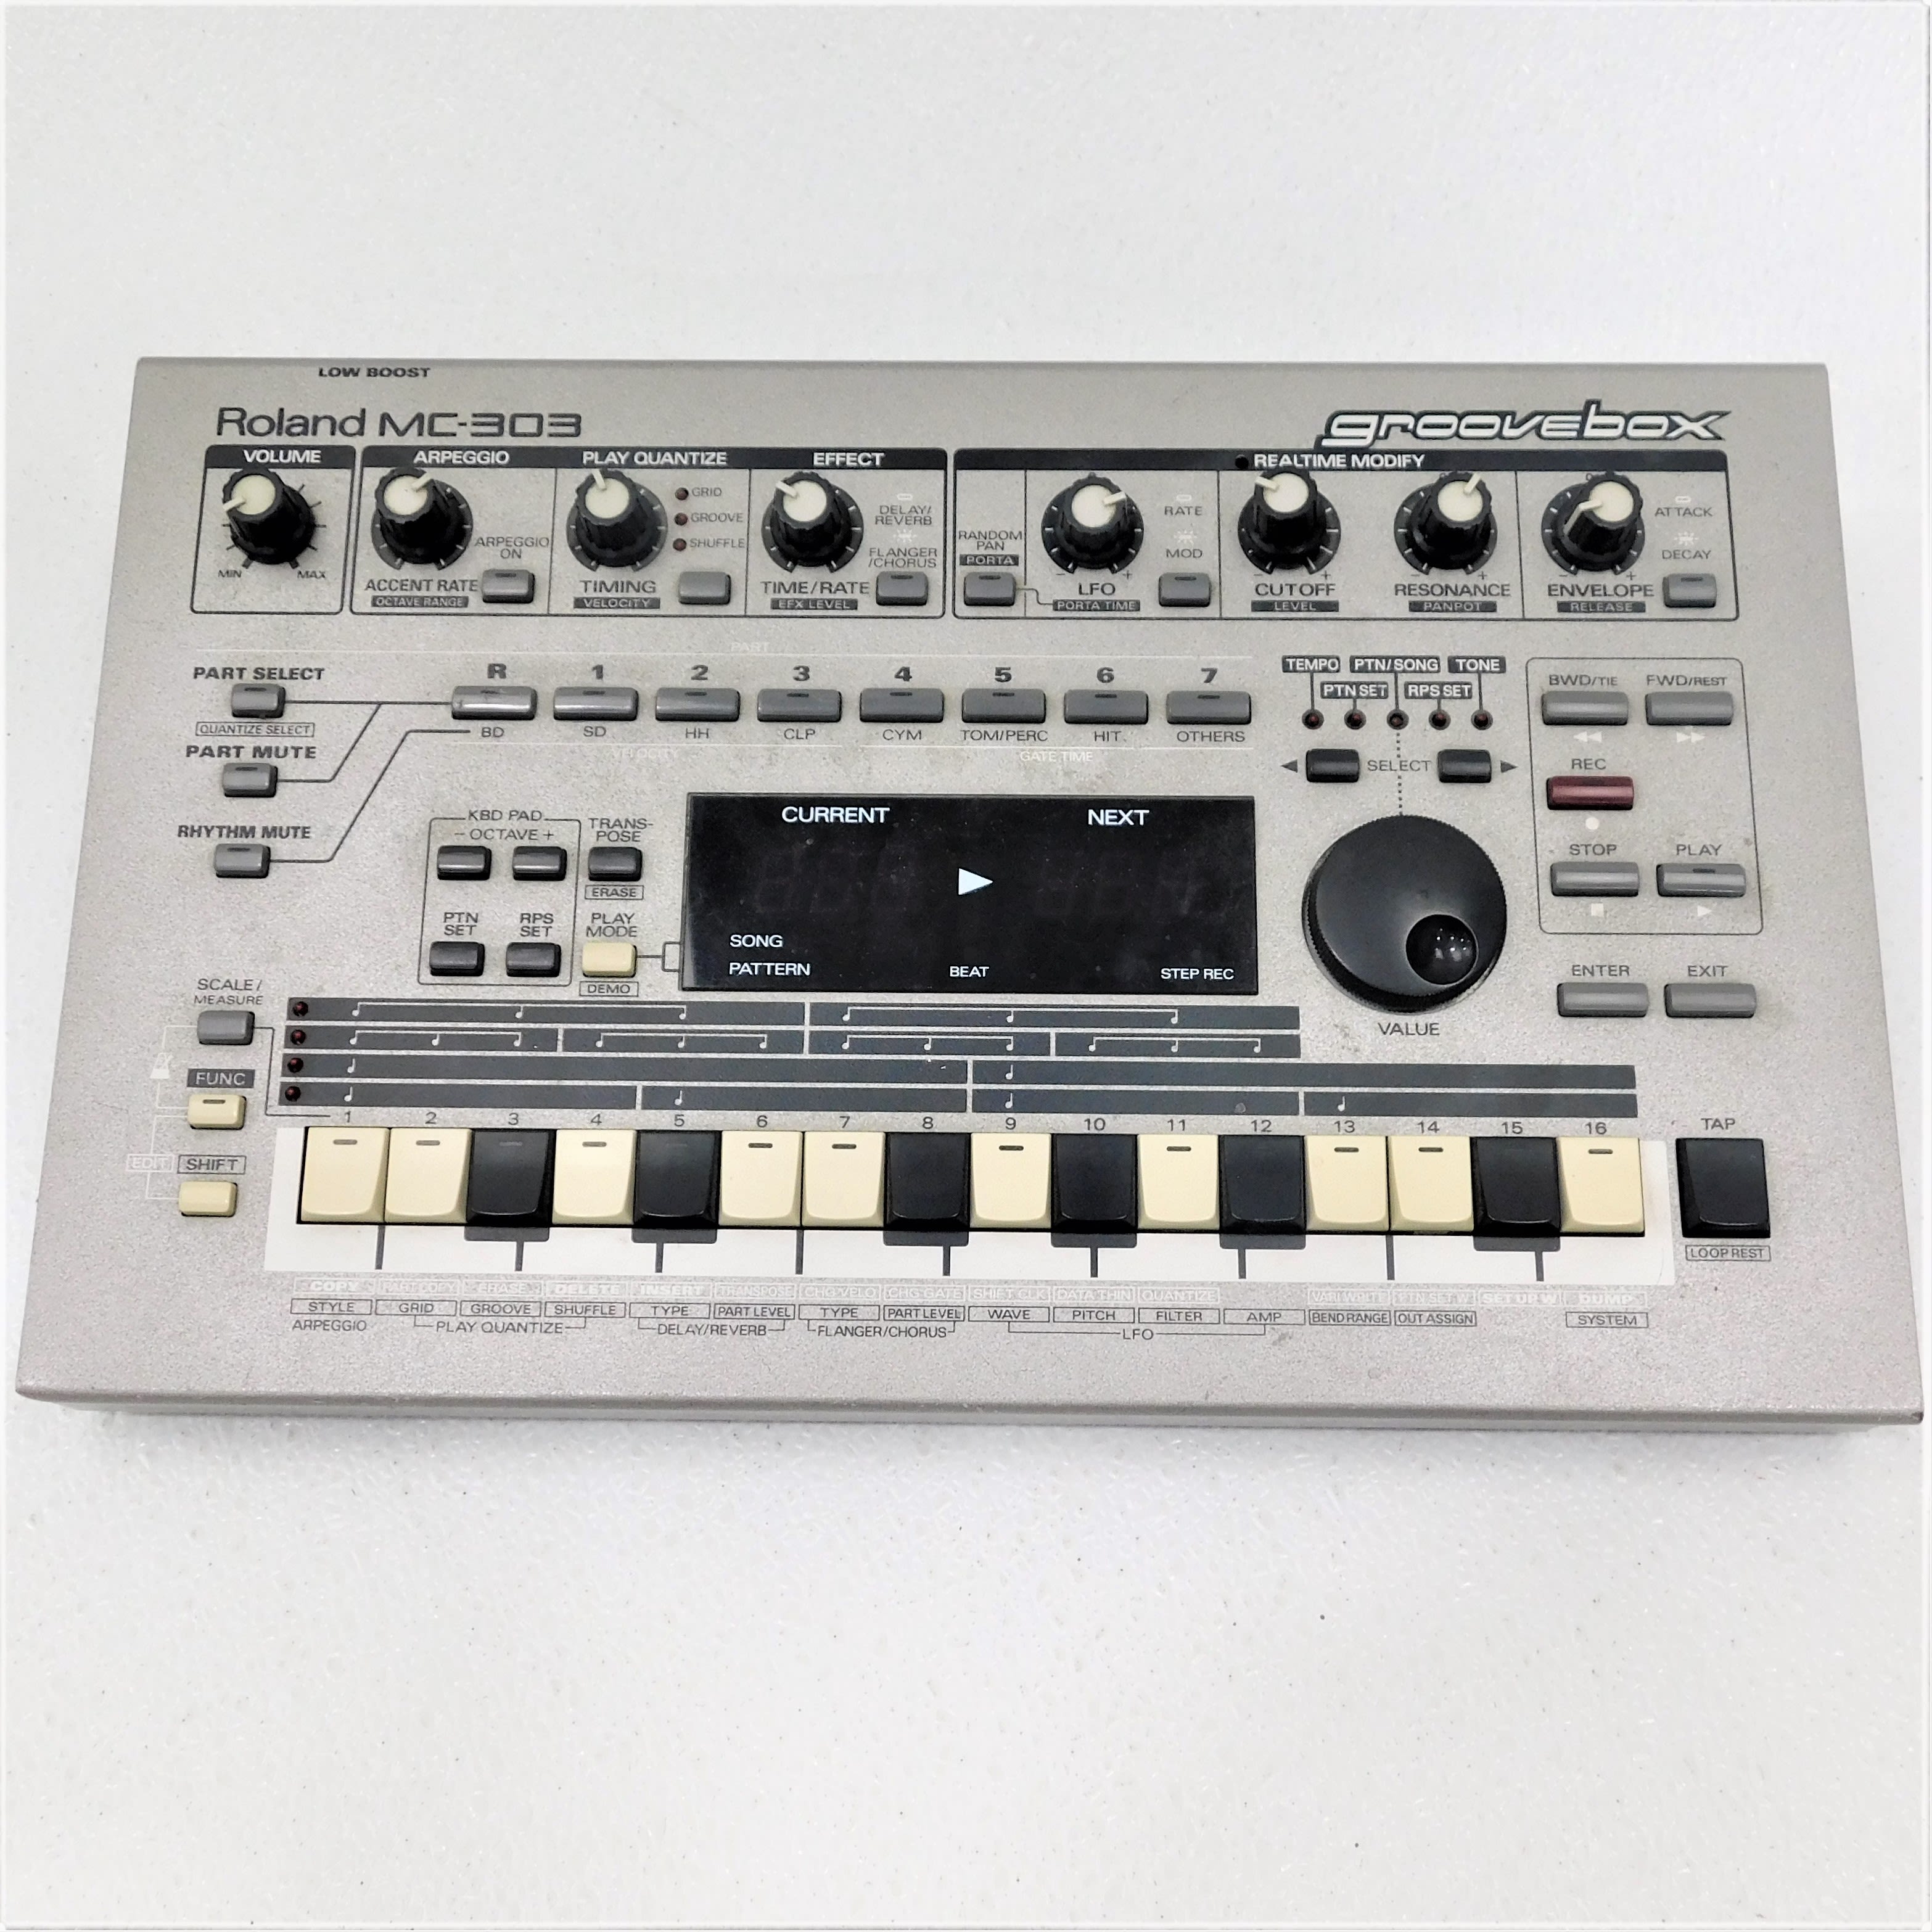 Buy the Roland MC-303 Groovebox | GoodwillFinds